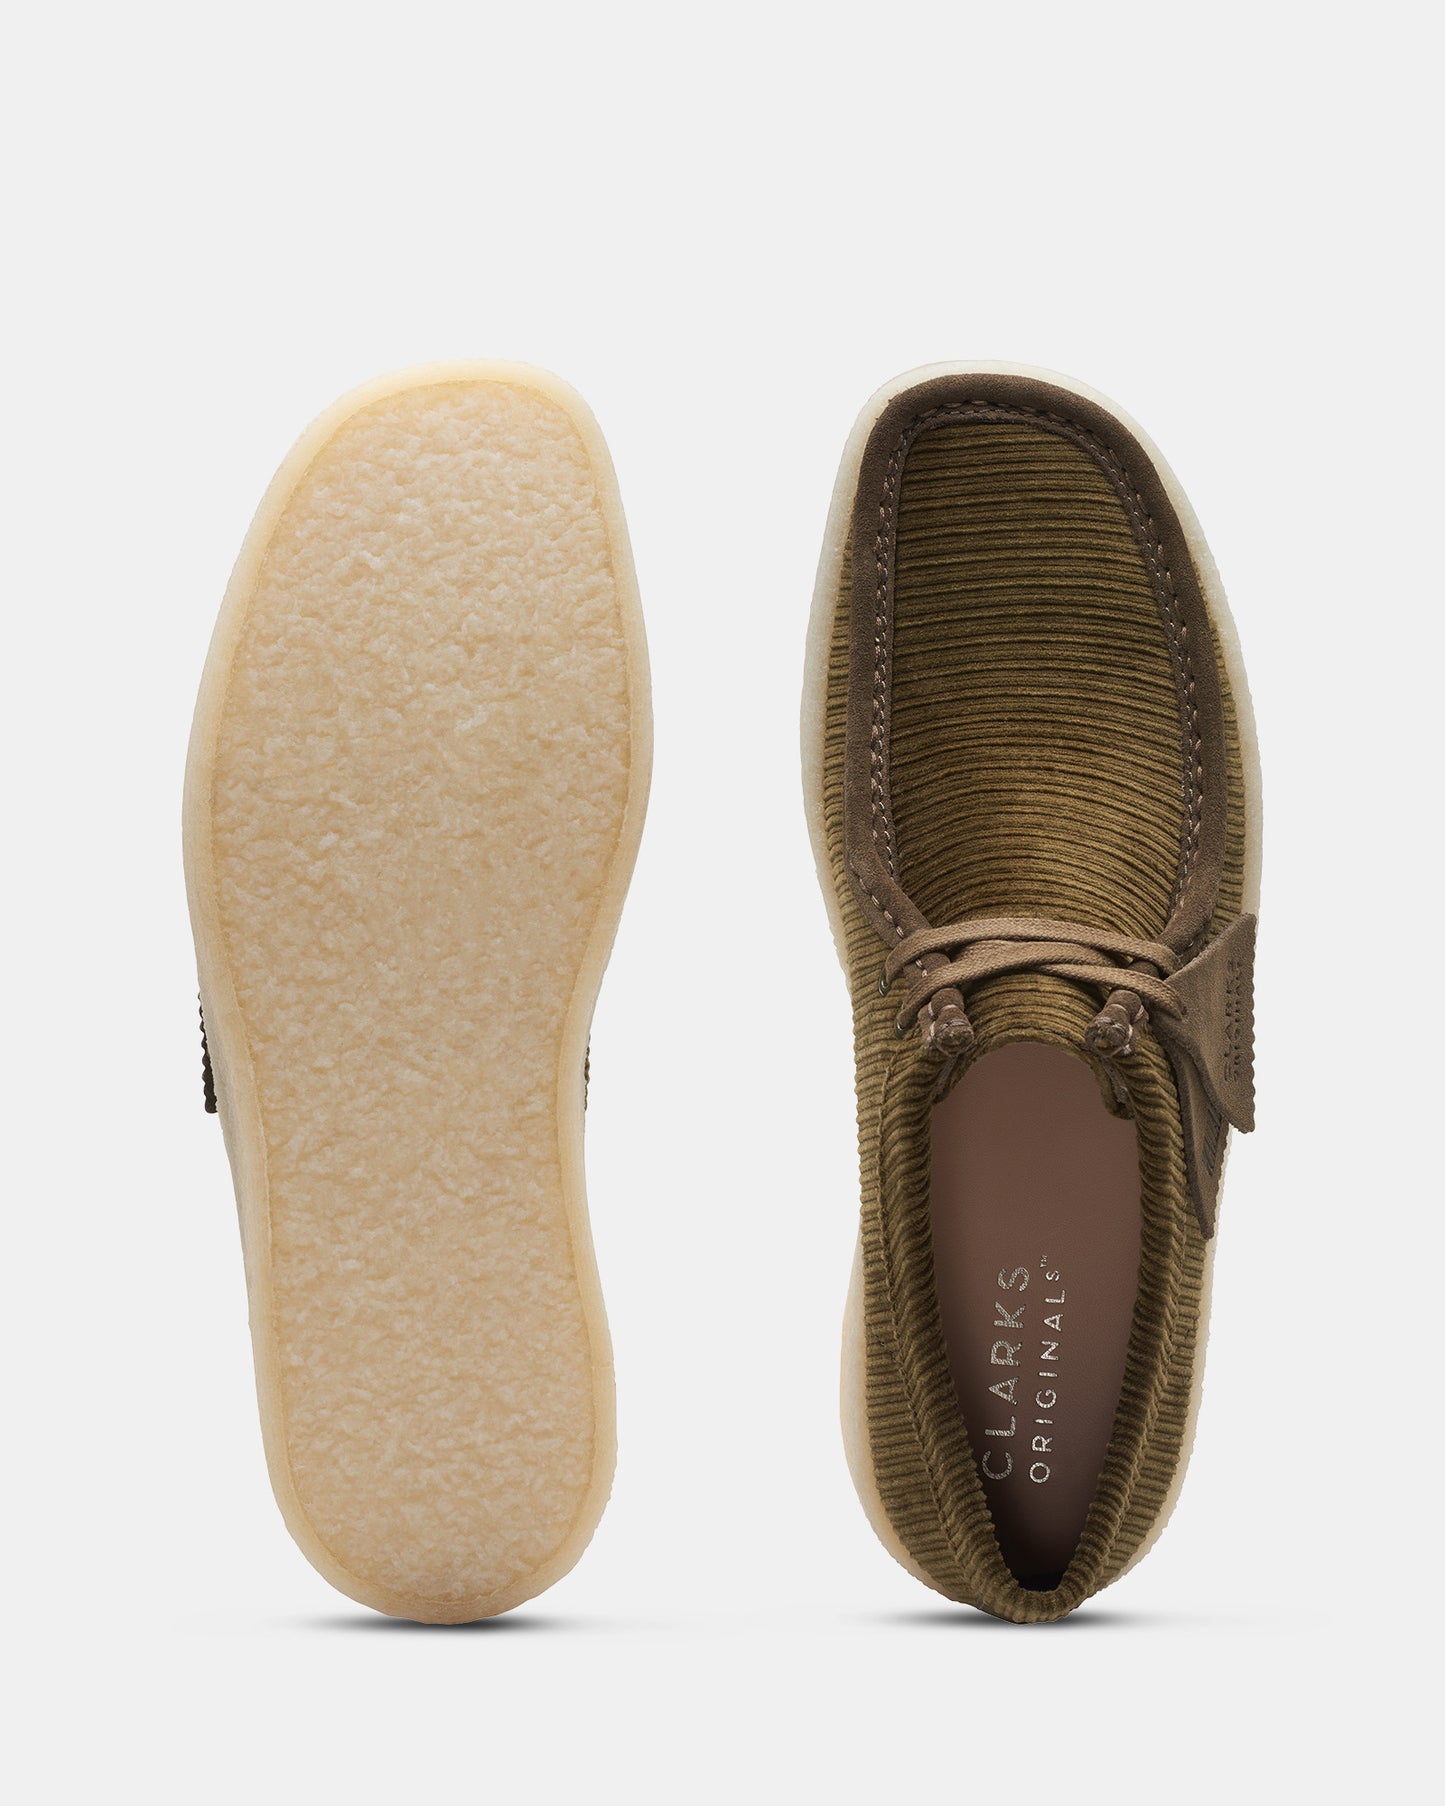 Wallabee Cup (M) Green Cord